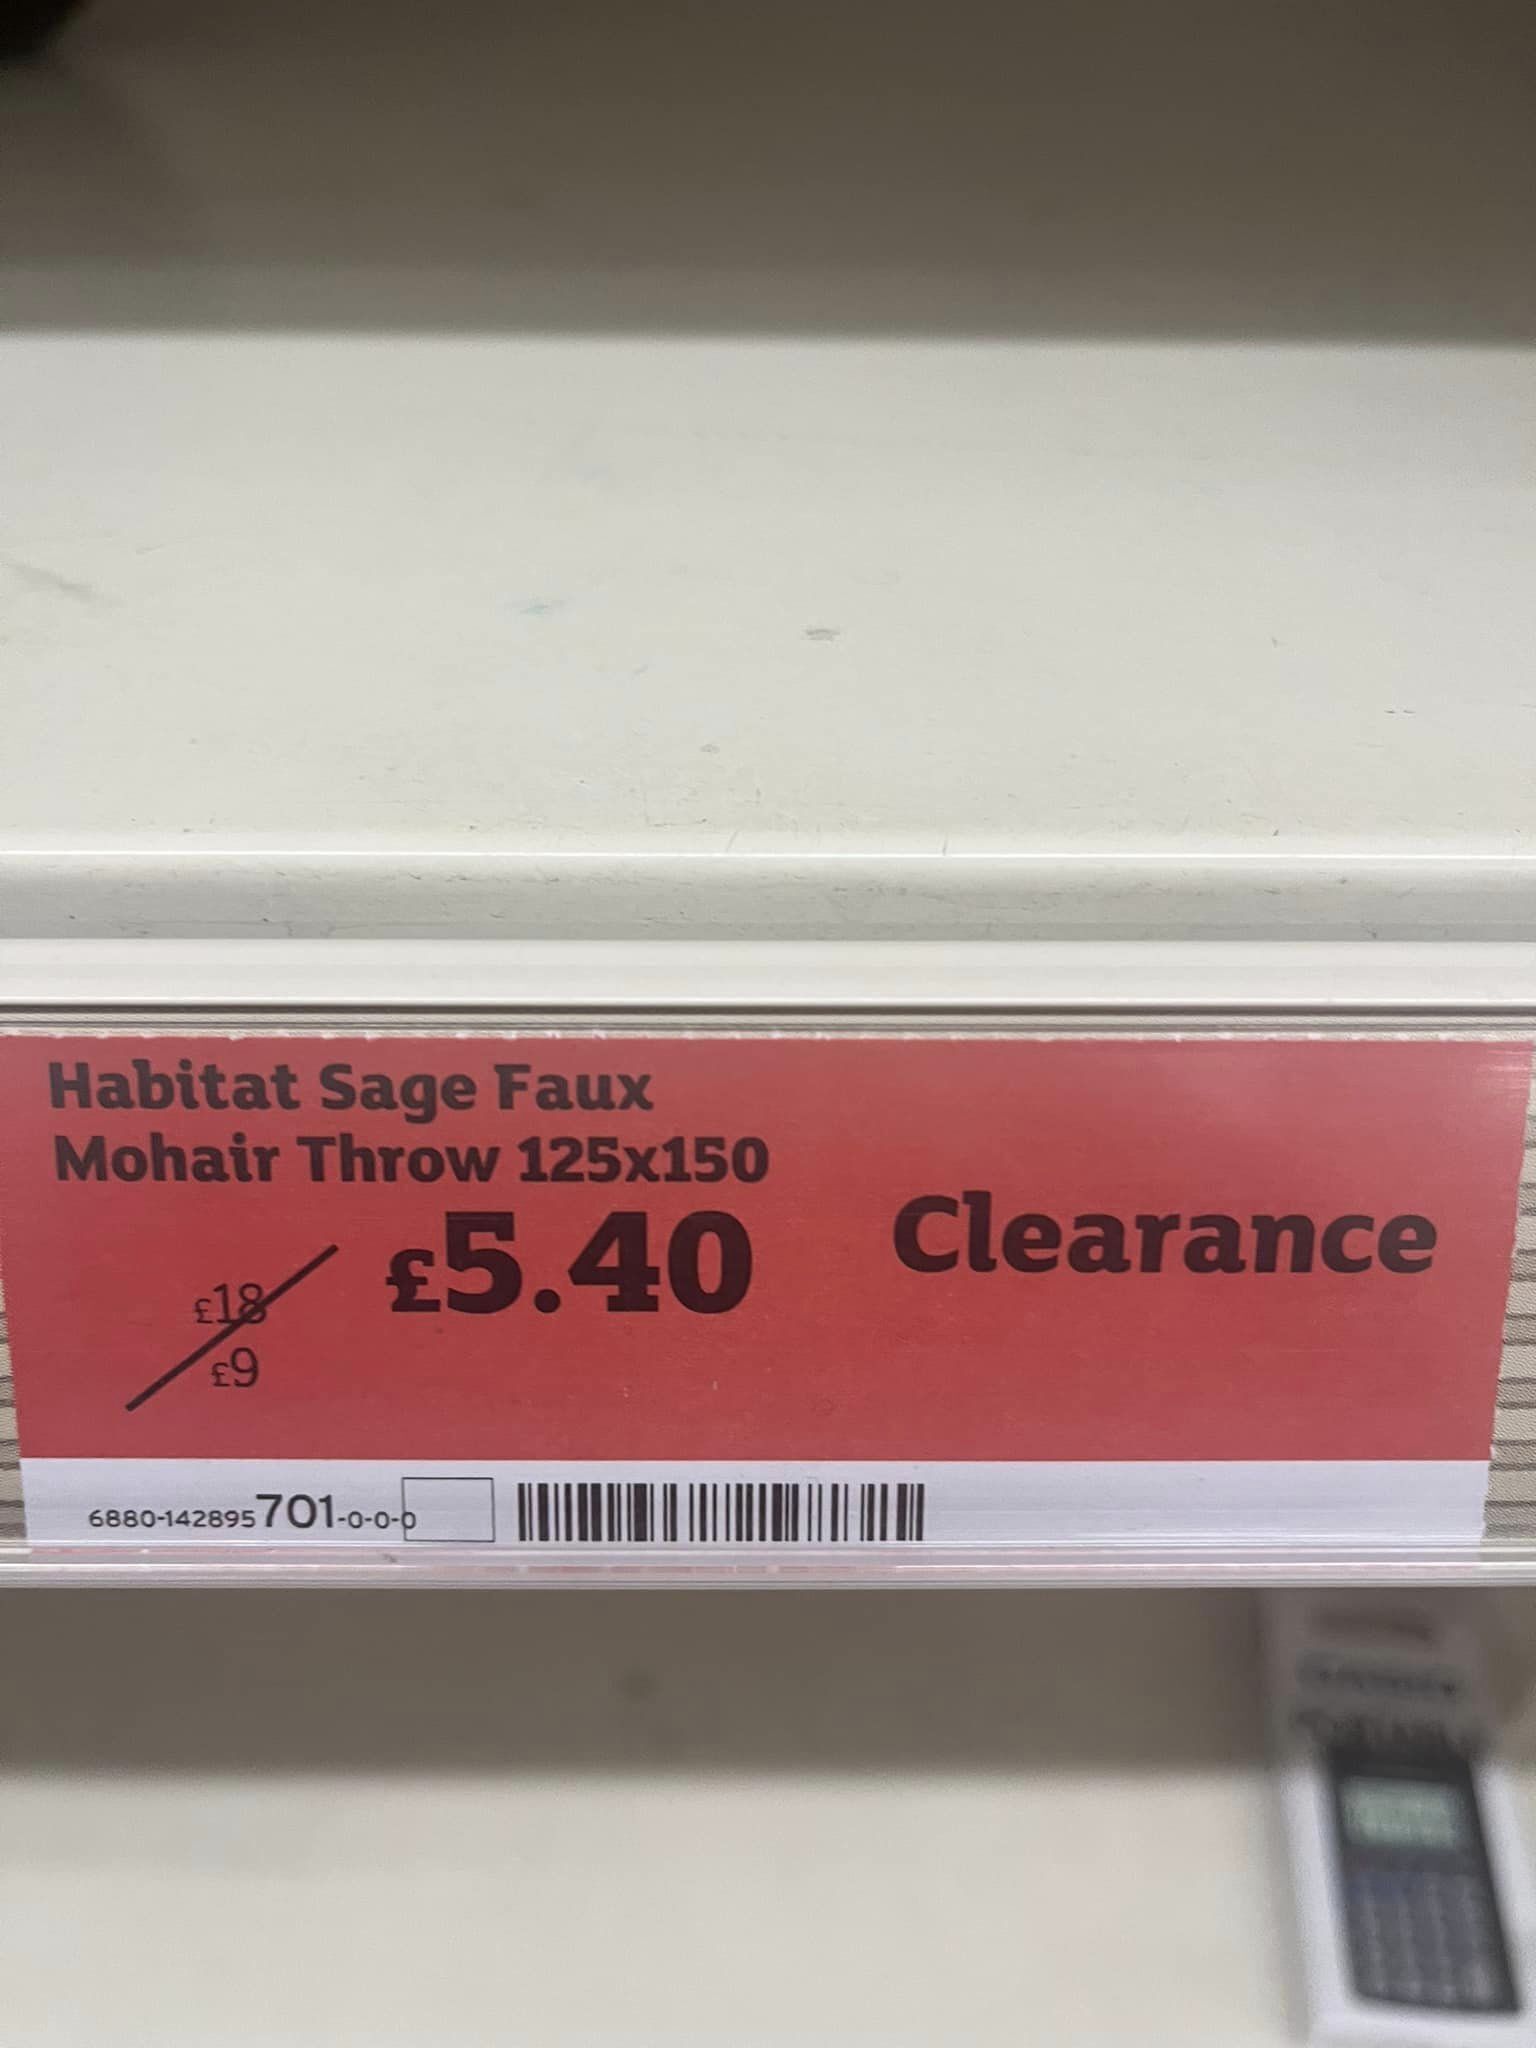 And now, its price has been slashed - selling for a bargain £5.40